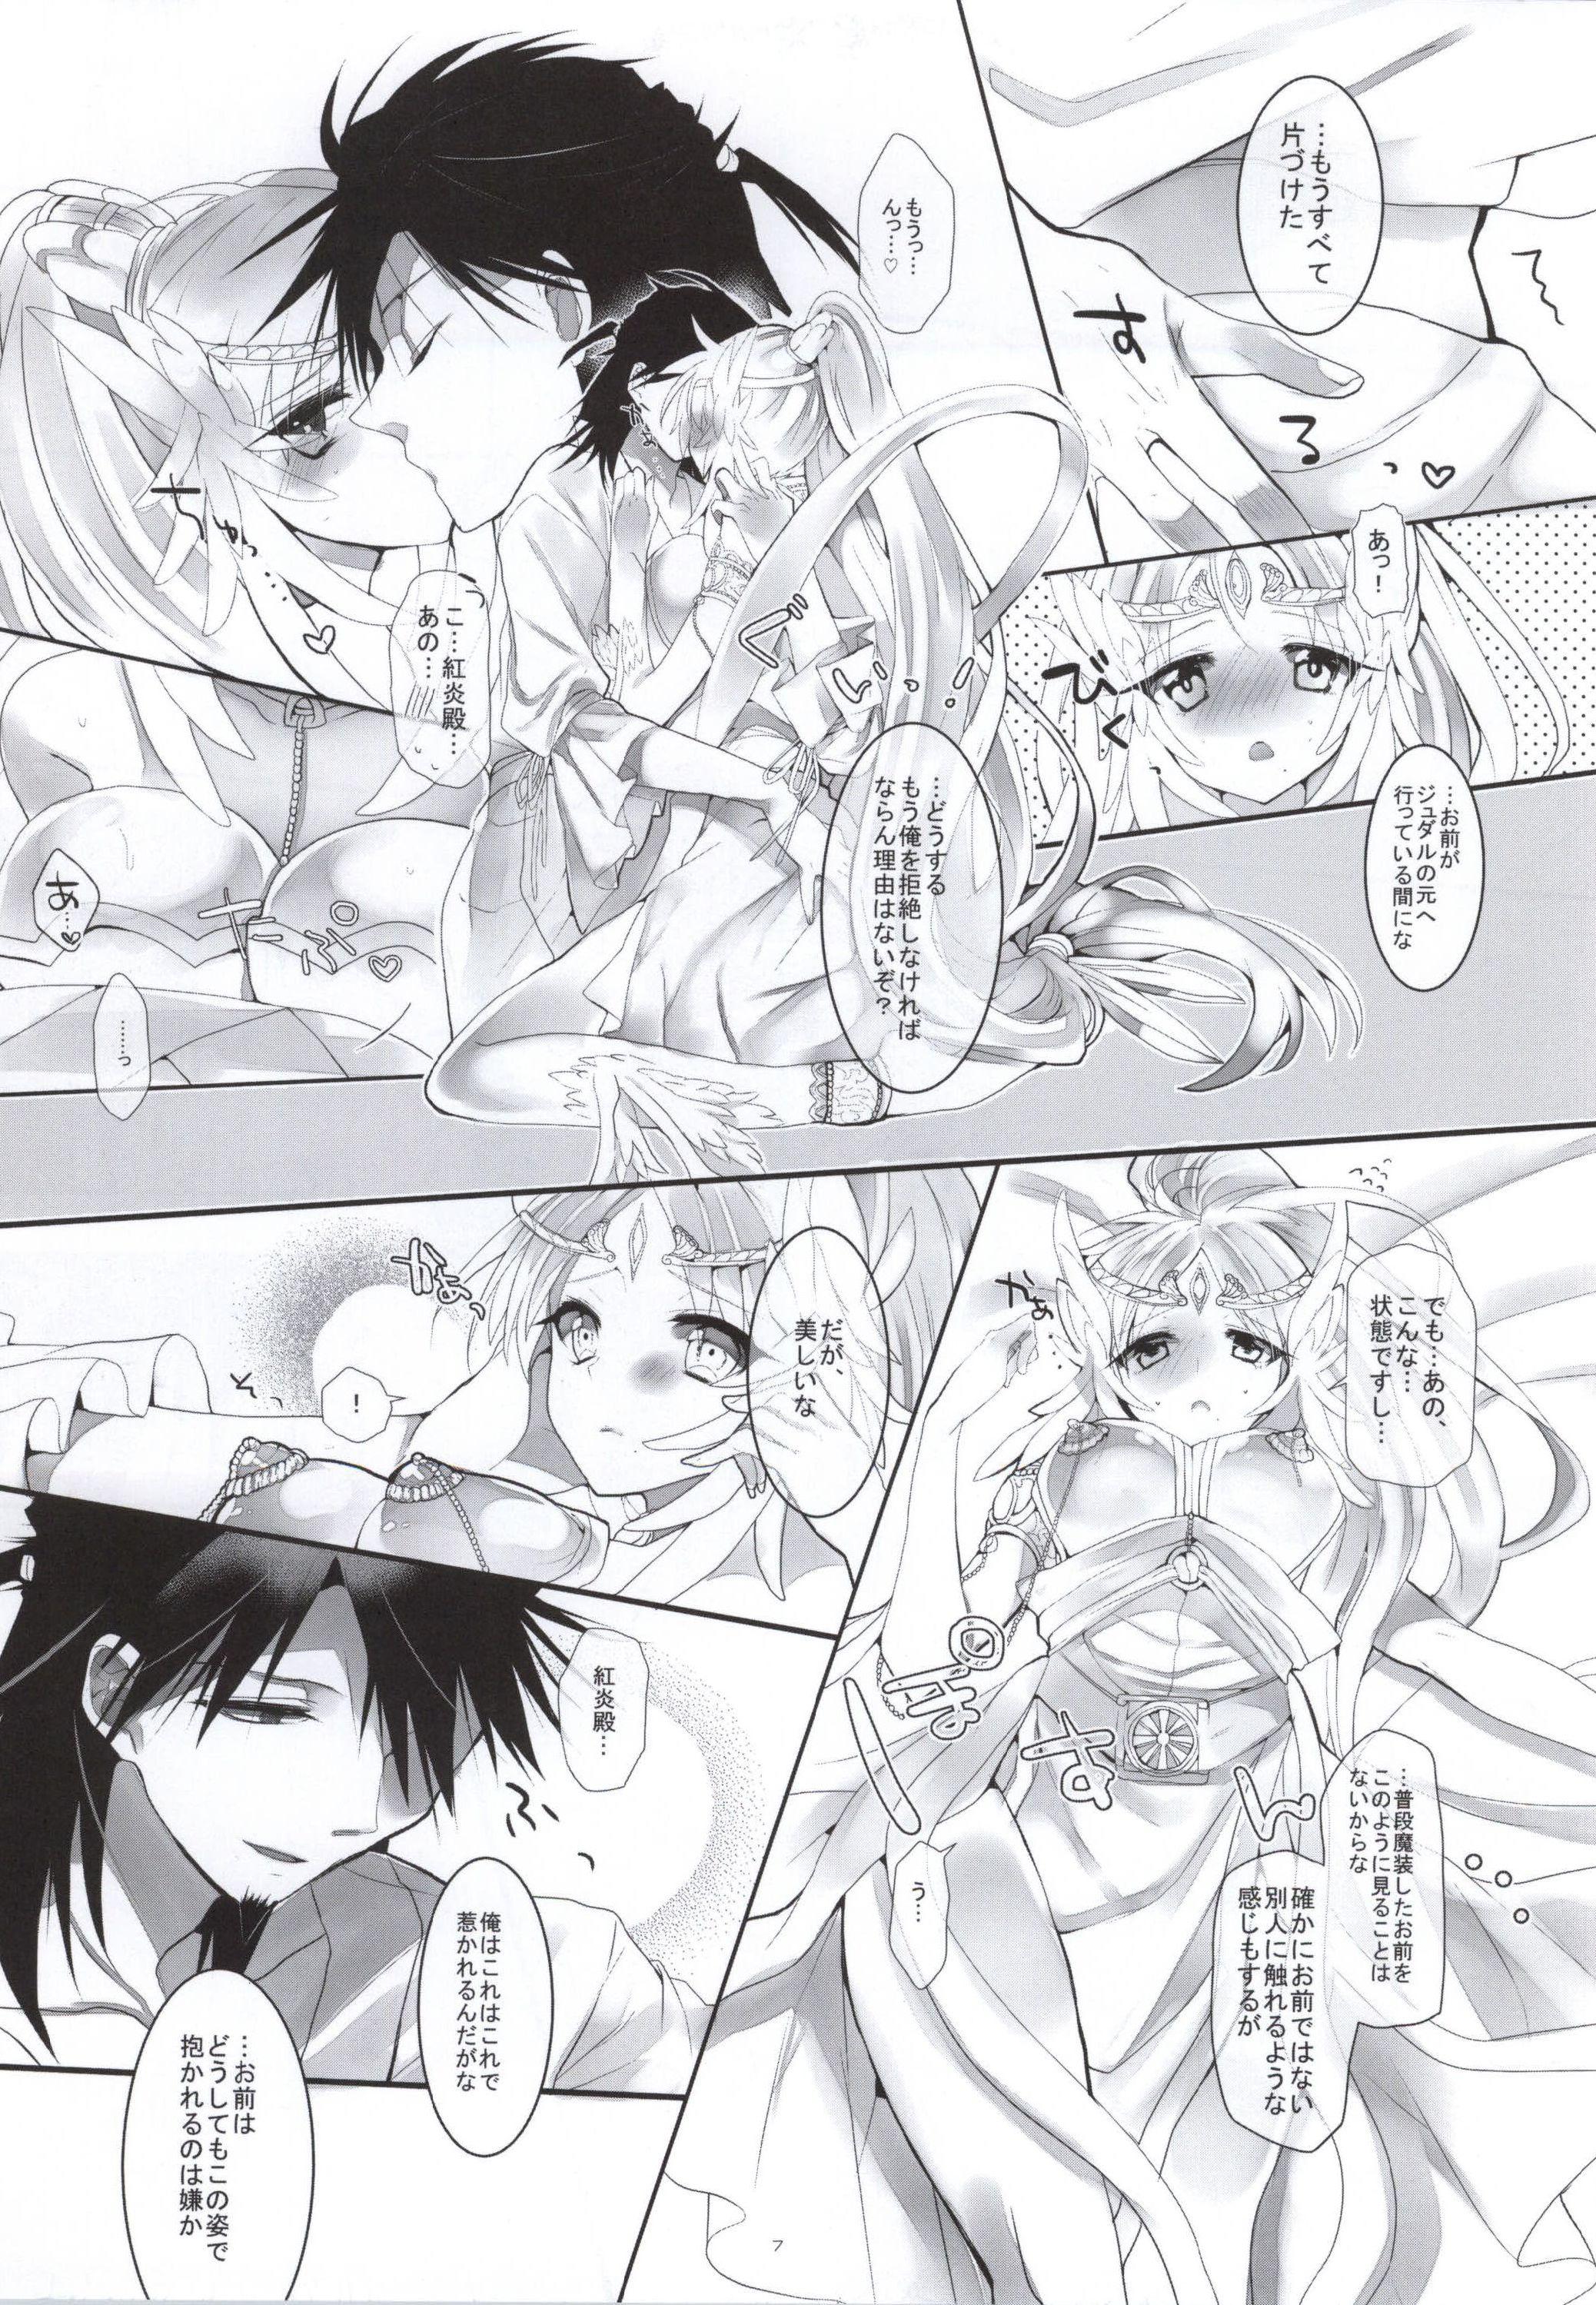 Hot Girl ANGELUS. - Magi the labyrinth of magic Spread - Page 6